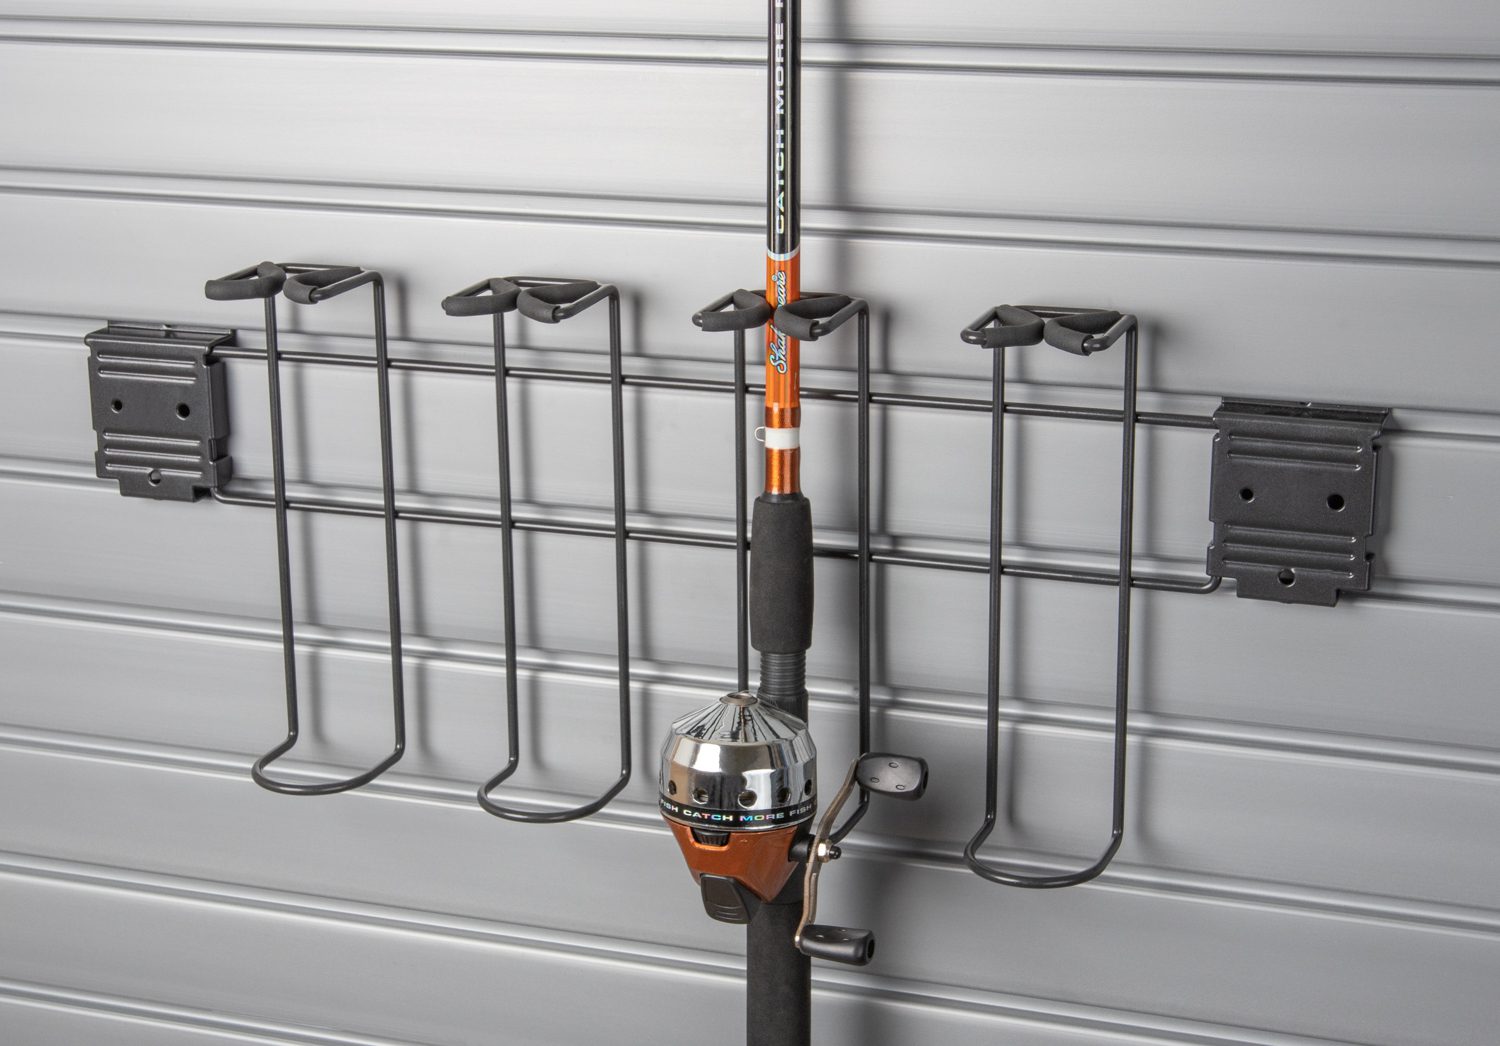 A Fishing Rod Holder placed On A wall